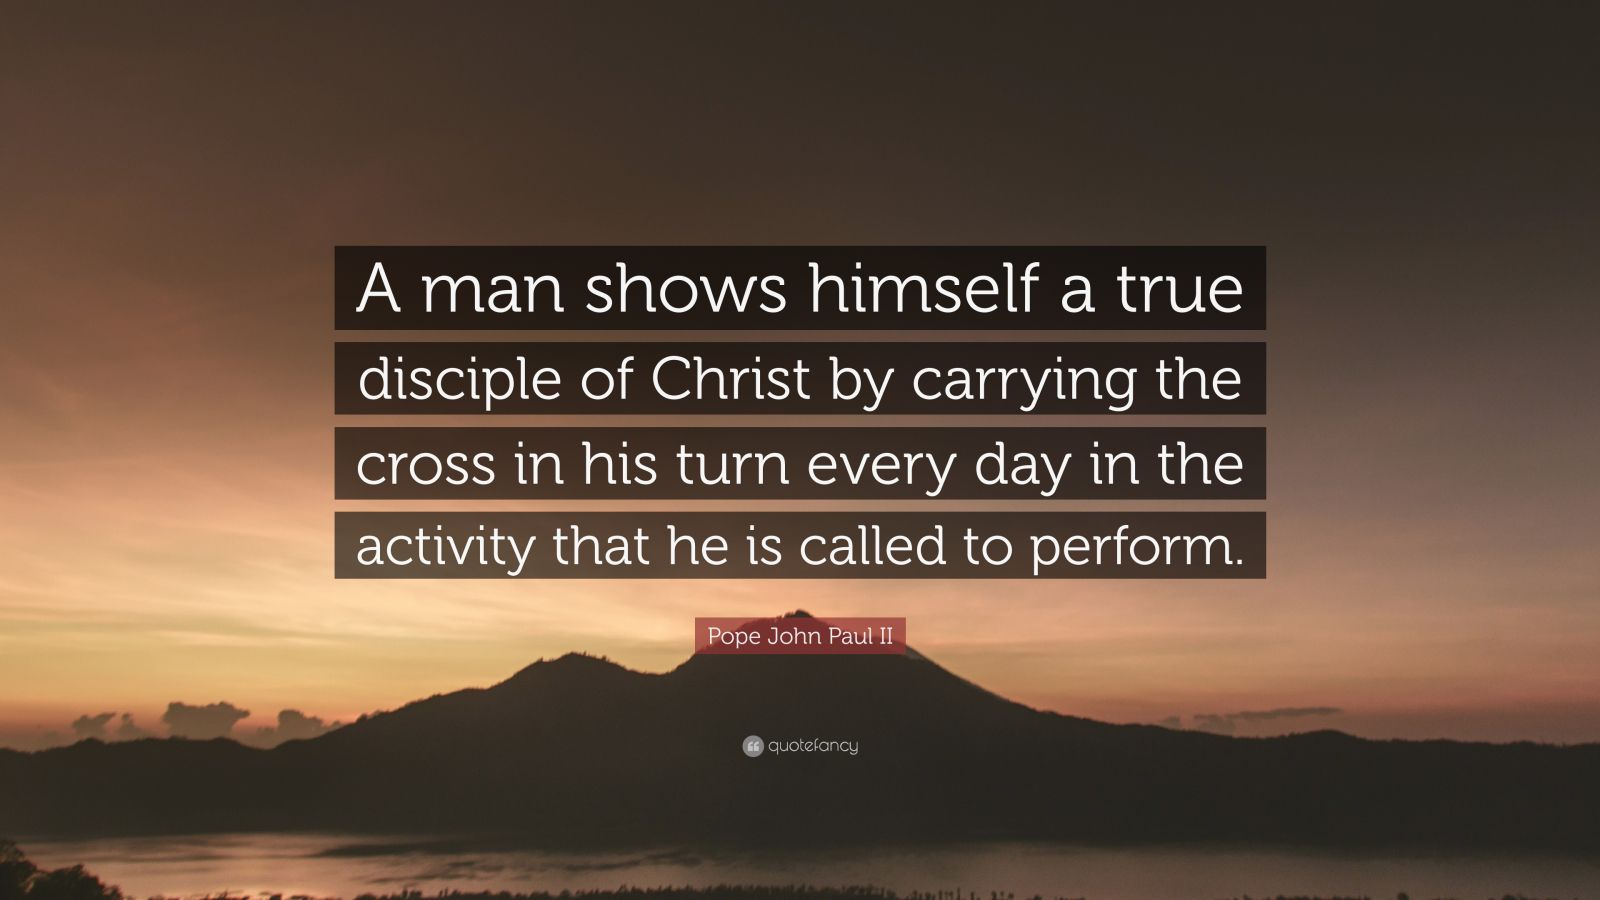 2781654 Pope John Paul II Quote A man shows himself a true disciple of